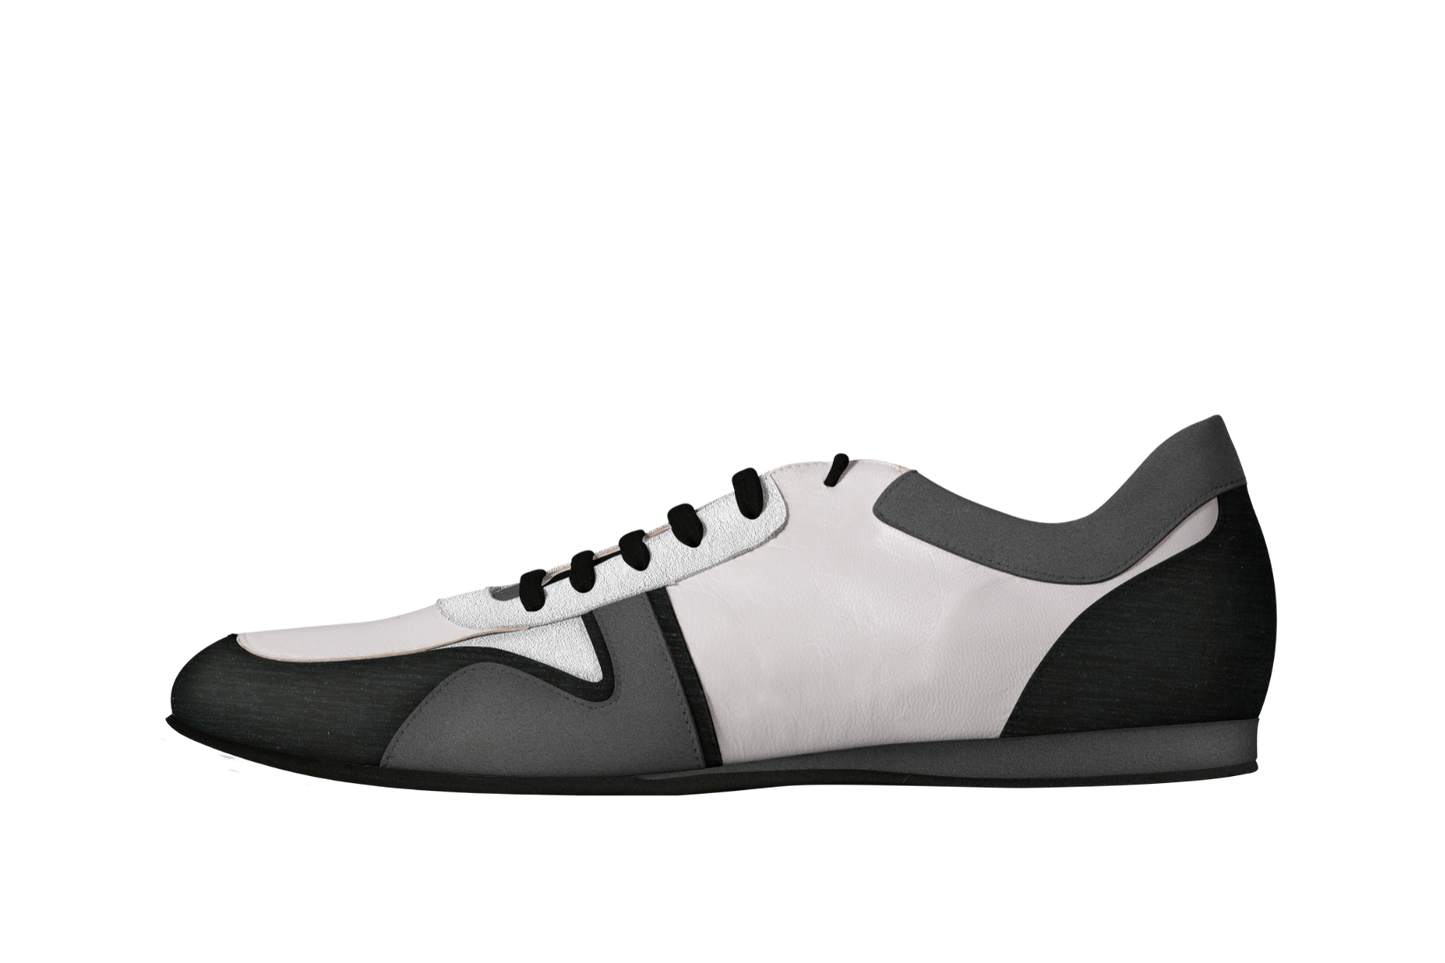 Dance Naturals 140 Venier Unisex Practice and Teaching Sneaker Dance Shoe Available in Two Color Designs